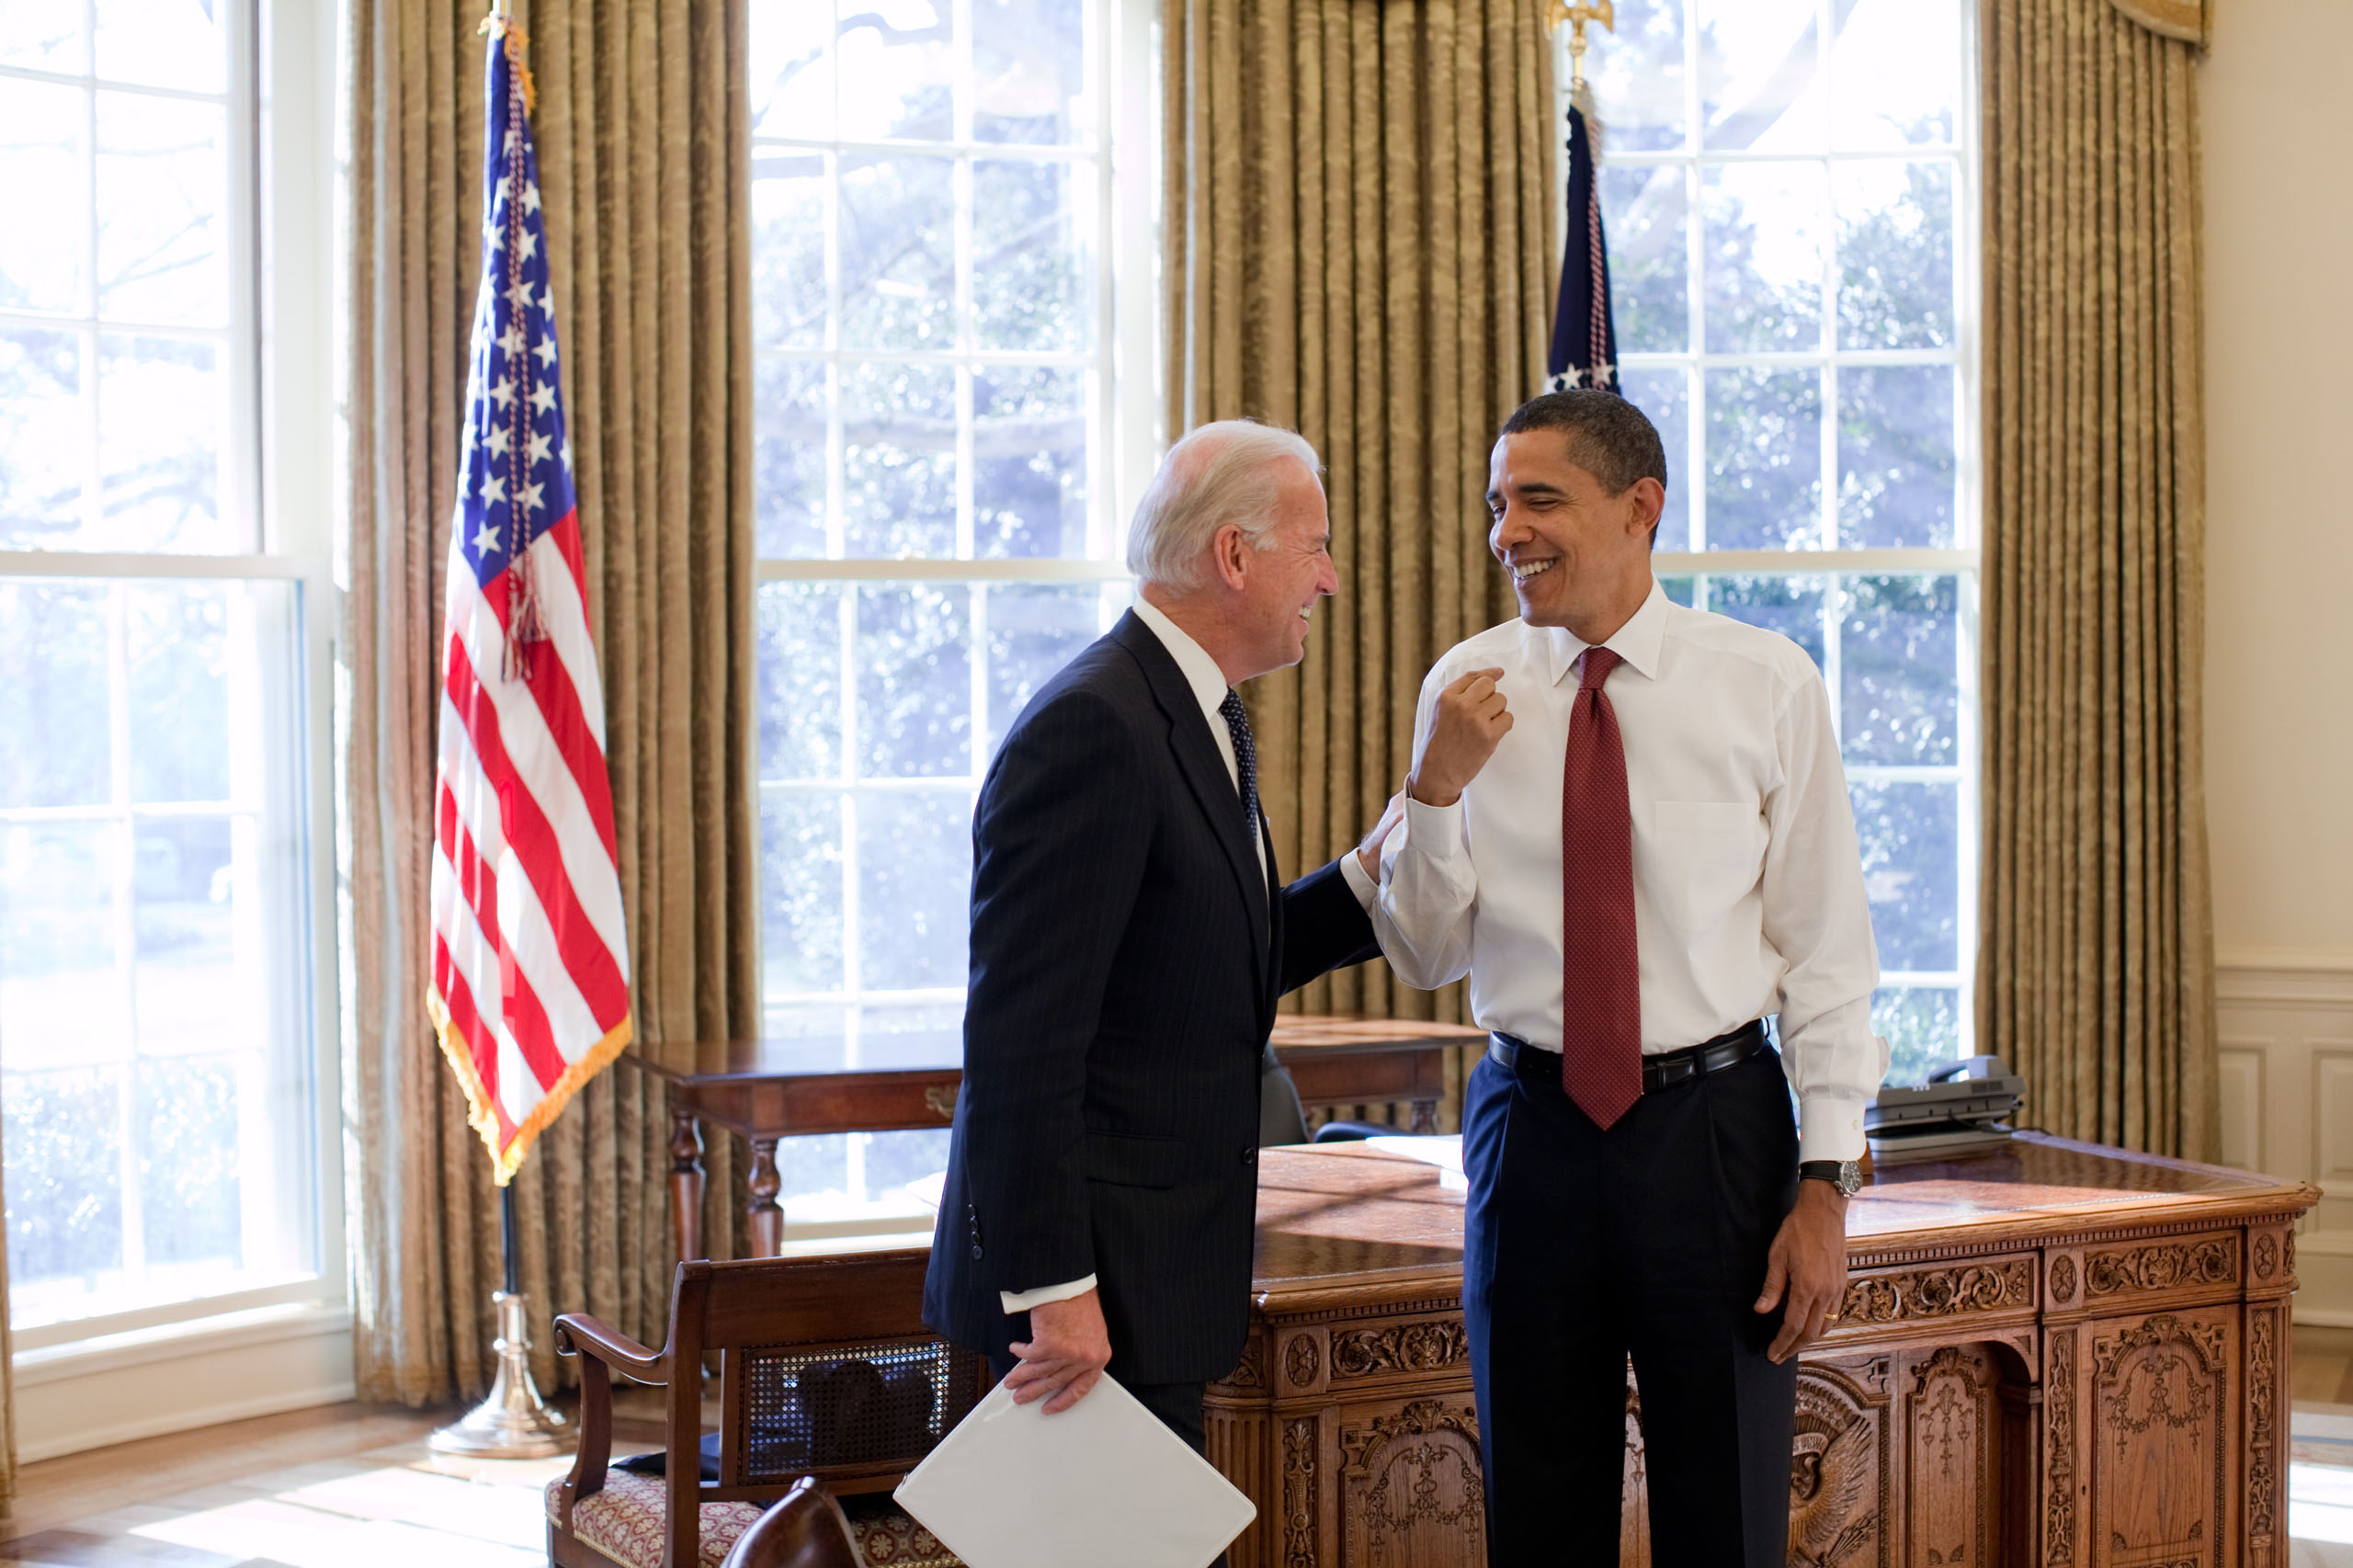 President Barack Obama and Vice President Joe Biden laugh together in the Oval Office on Jan. 22, 2009.